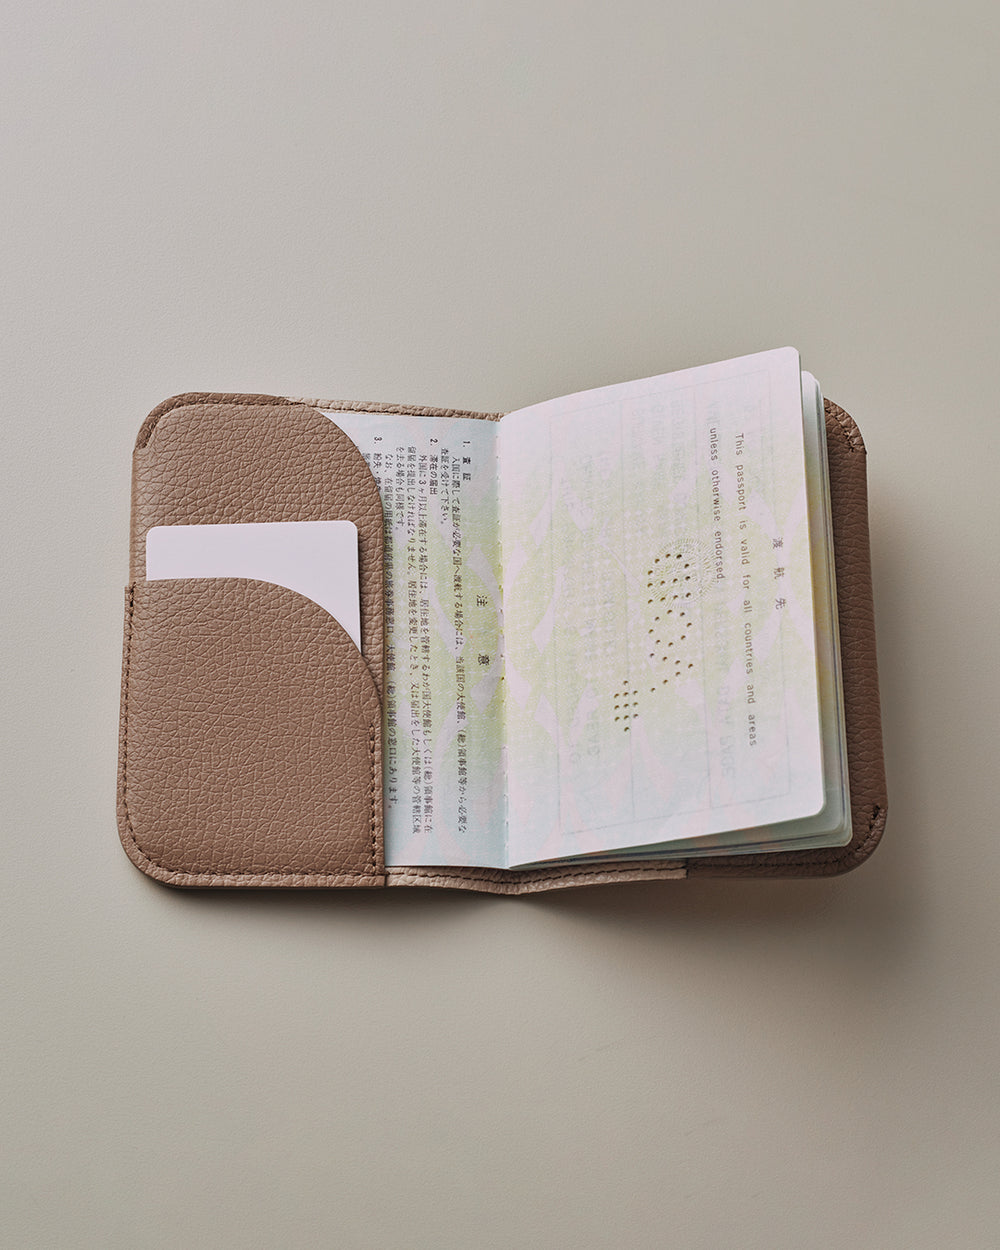 Open passport in a holder with a document inside.